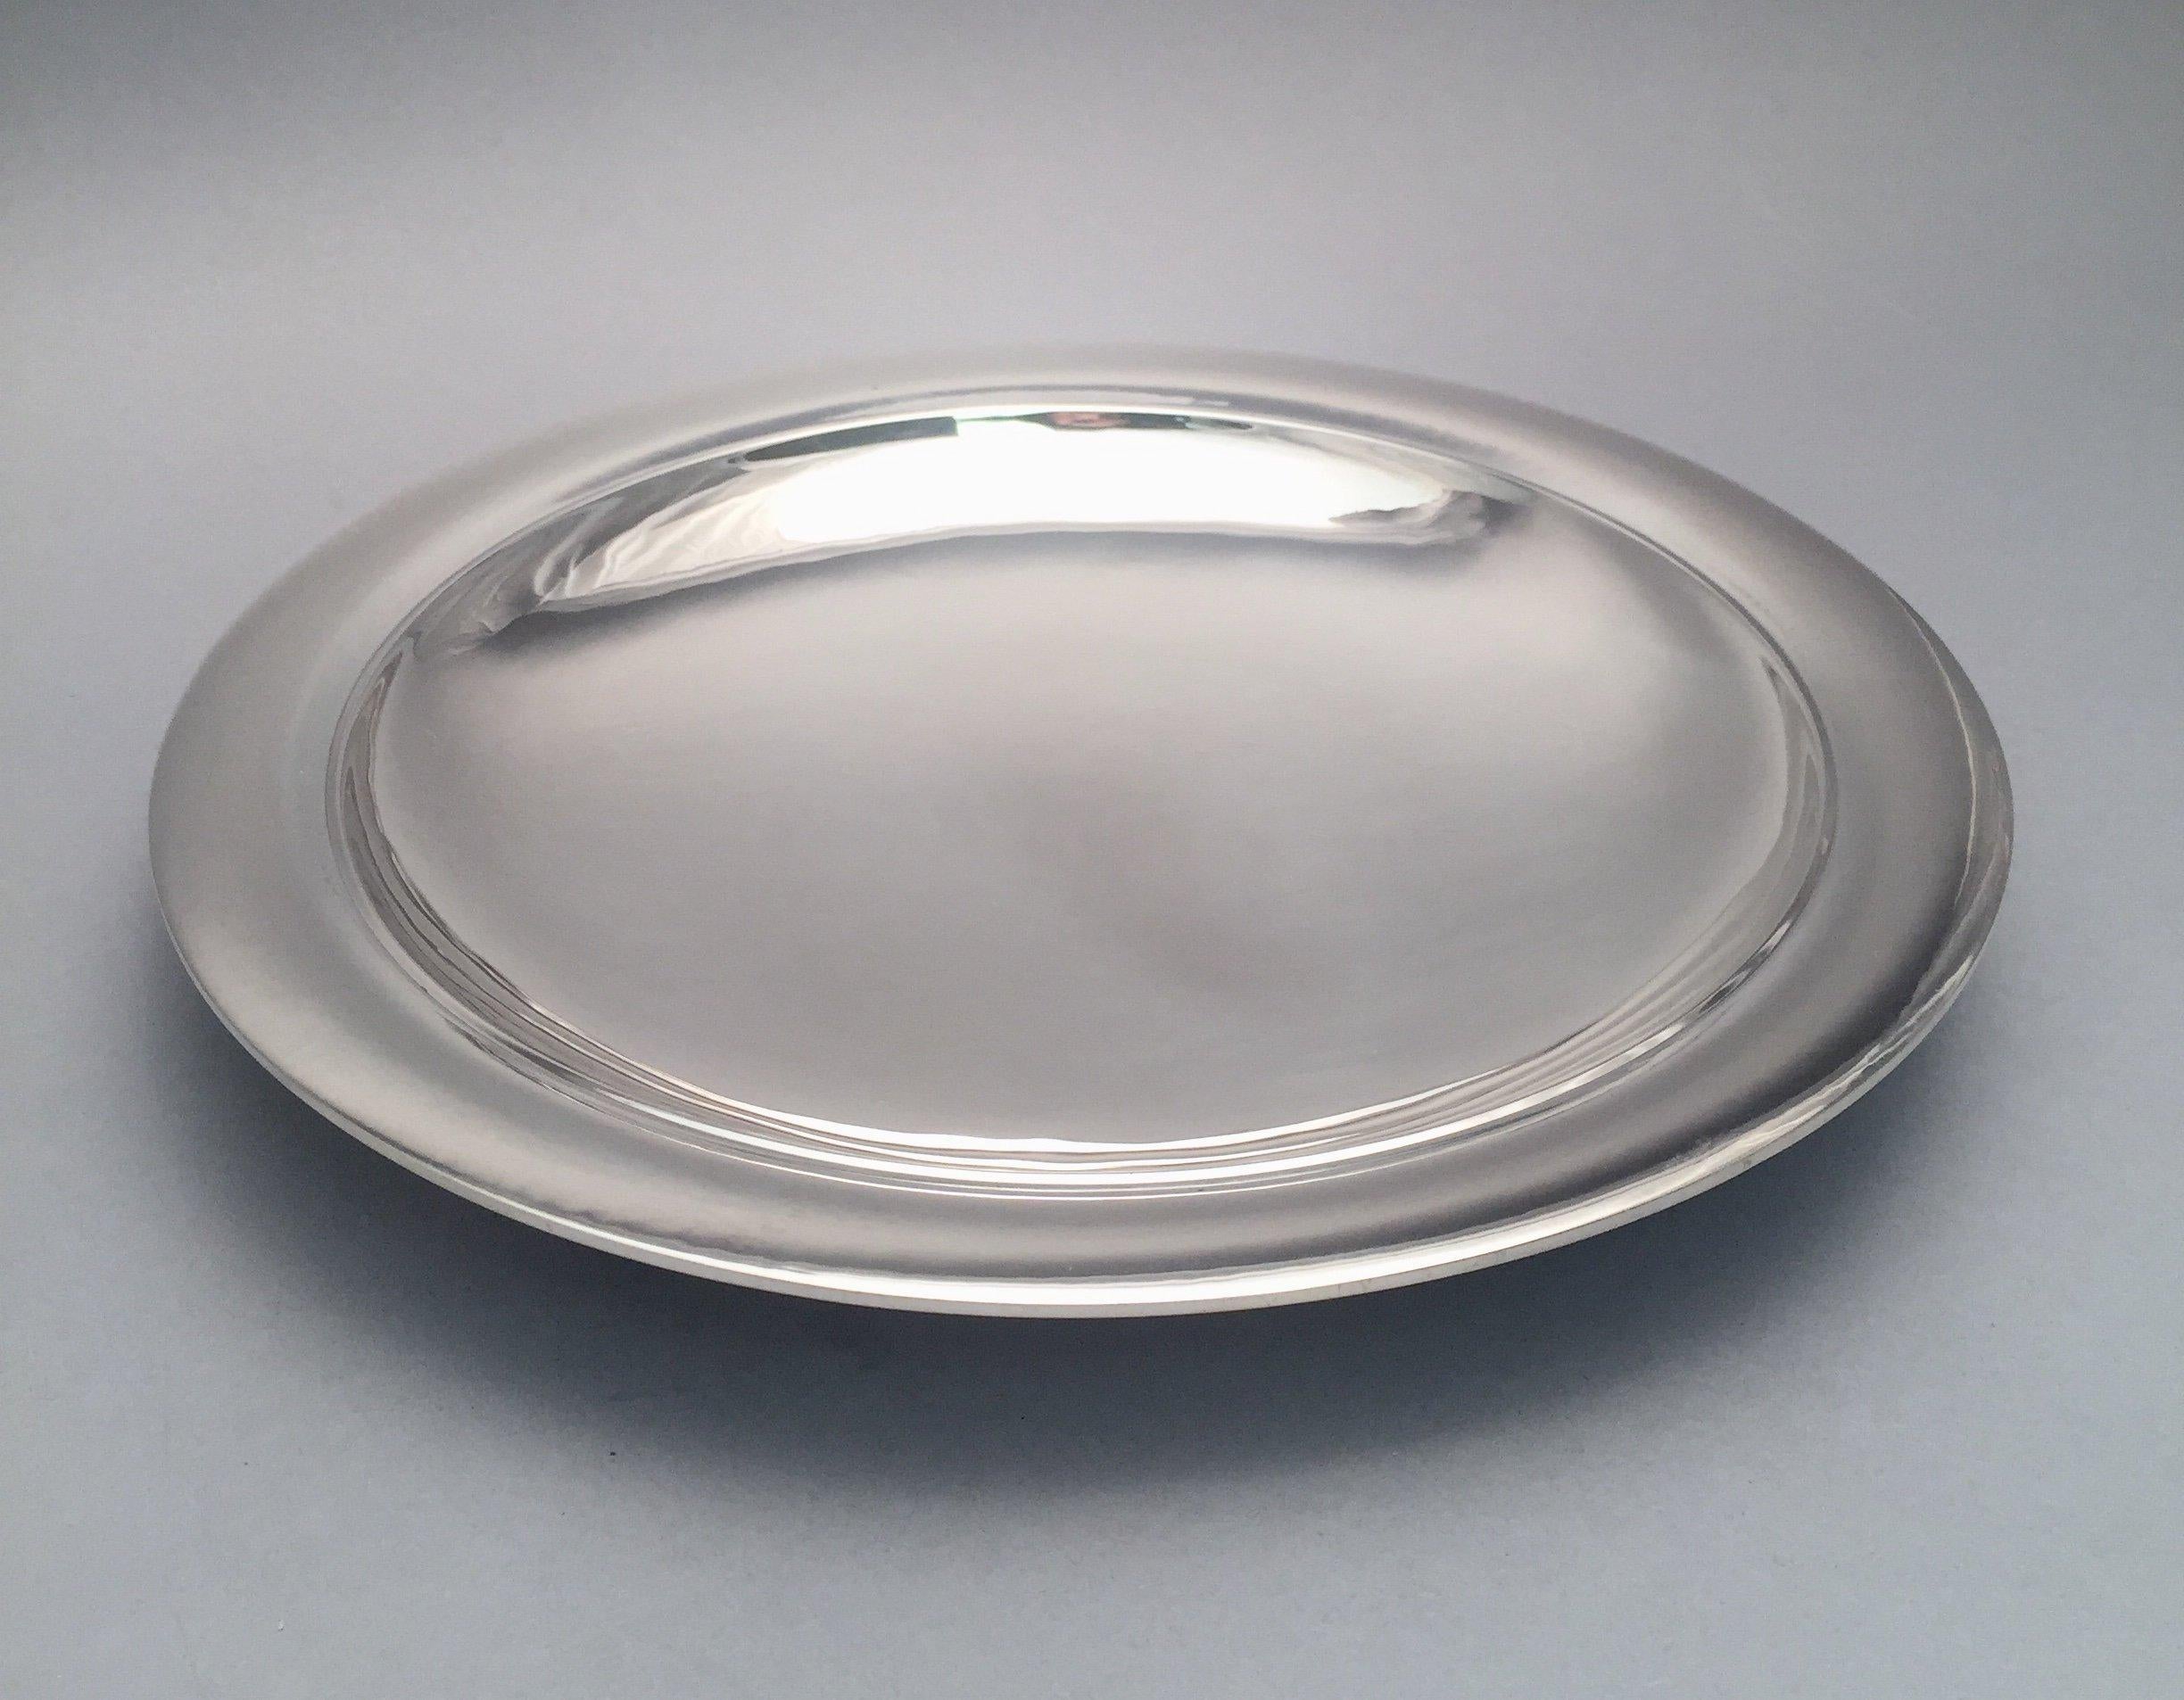 Beautiful and classic sterling silver serving dish plate by the illustrious Danish maker Georg Jensen, designed by Harald Nielsen in pattern #687. Measuring 9 1/2 inches in diameter. Weighing 14.3 troy ounces. Bearing hallmarks as shown.

Georg